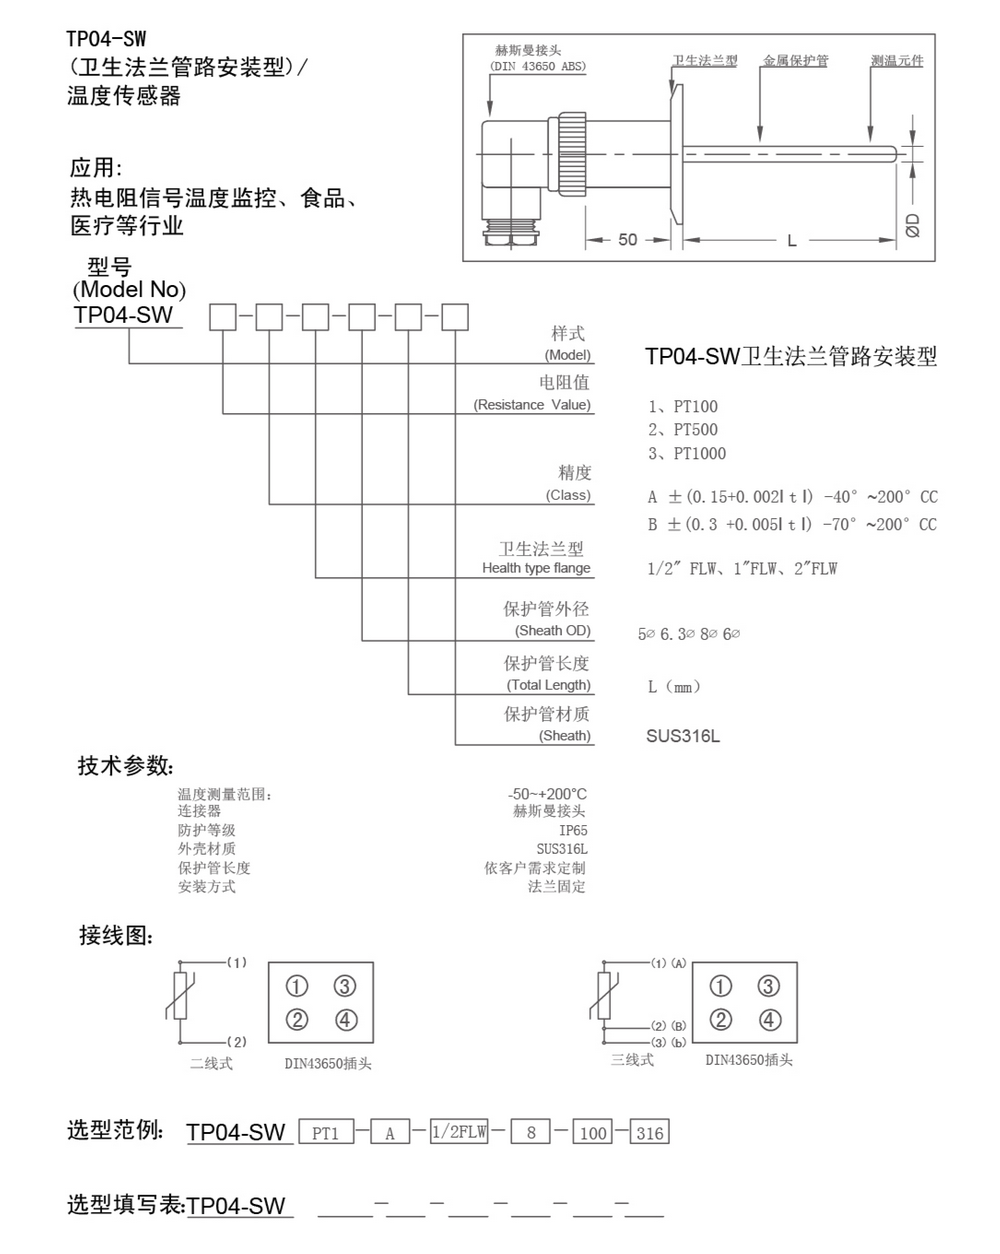 12）TP04-SW管道型 法兰安装-资料.png